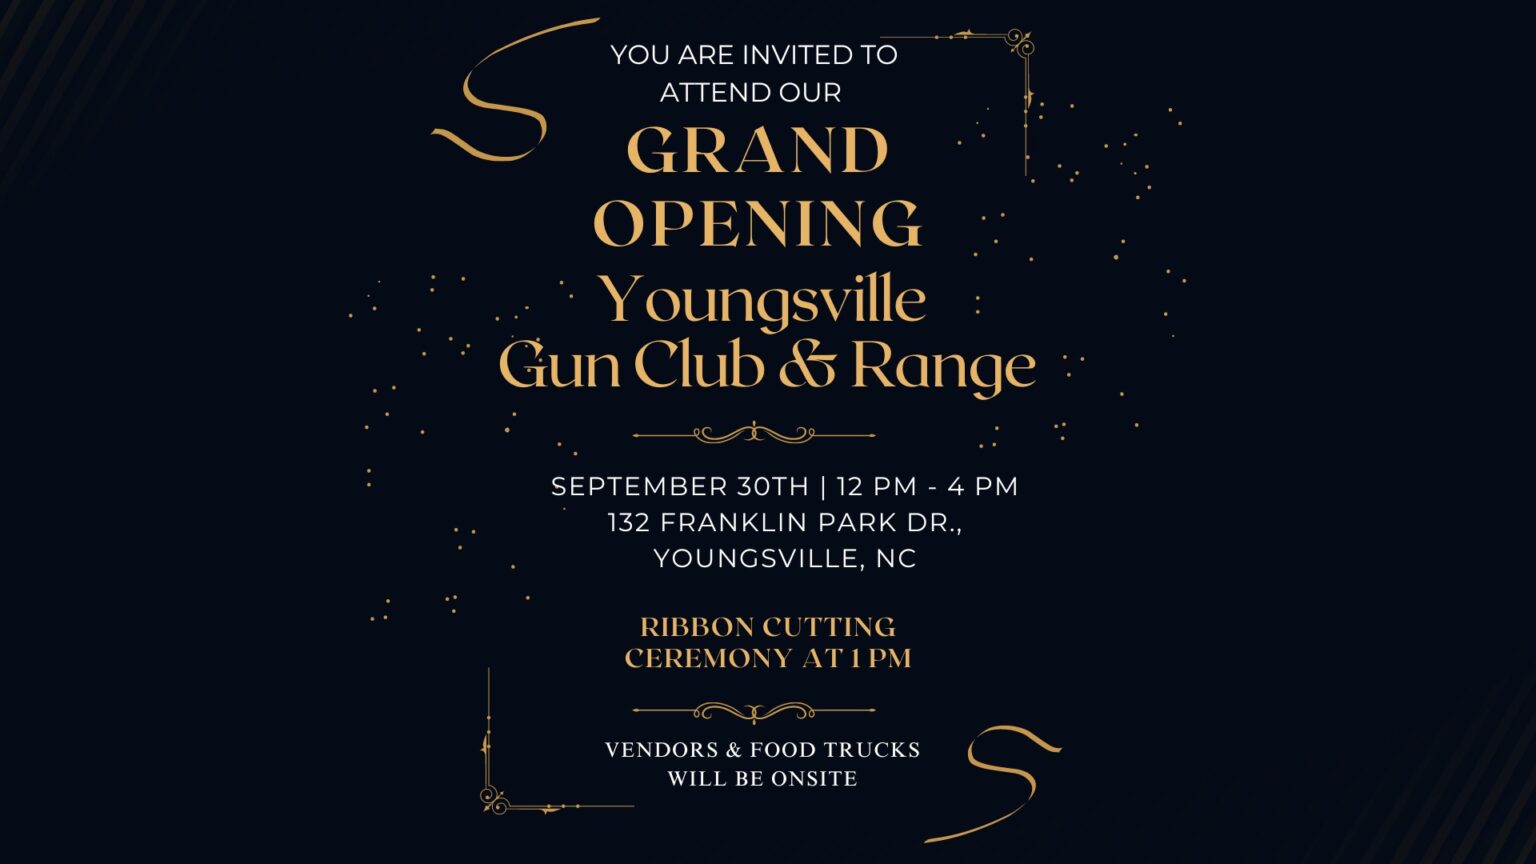 Join us for the Grand Opening of Youngsville Gun Club + Range!